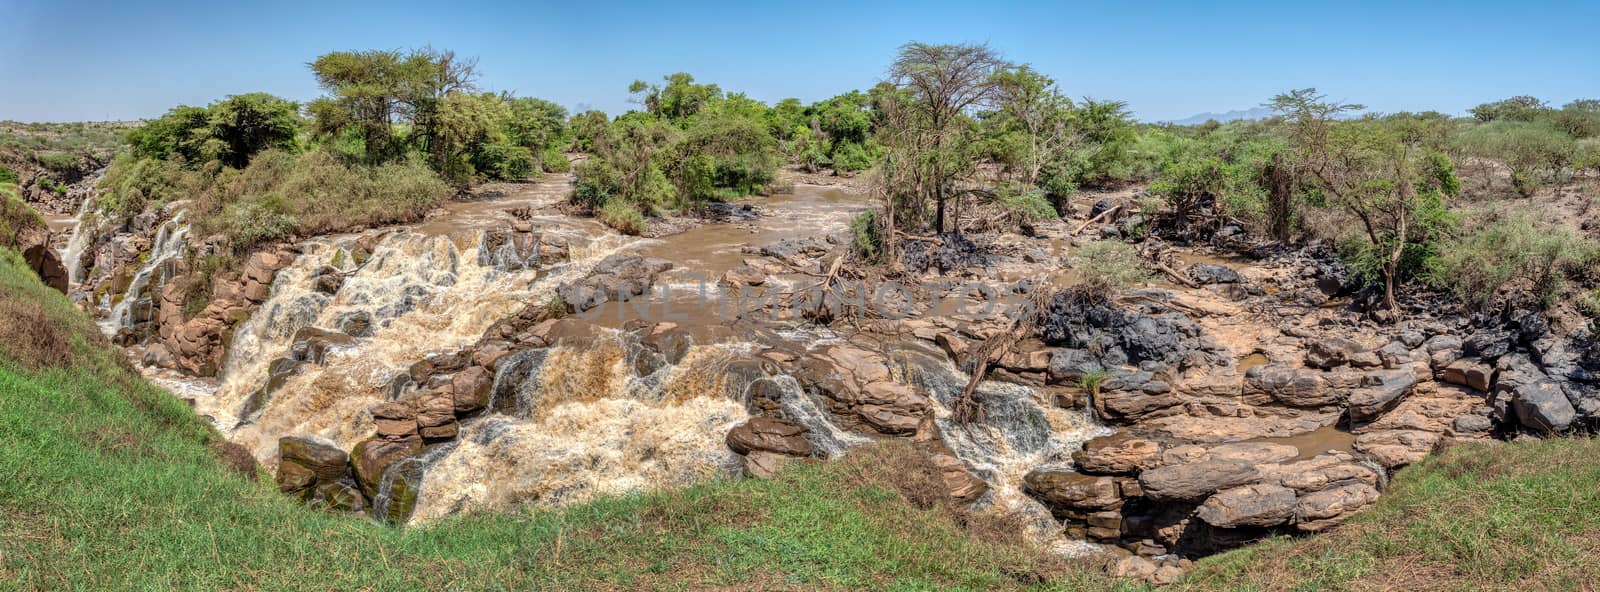 wide panorama of beautiful waterfall in Awash National Park. Waterfalls in Awash wildlife reserve in south of Ethiopia. Wilderness scene, Africa